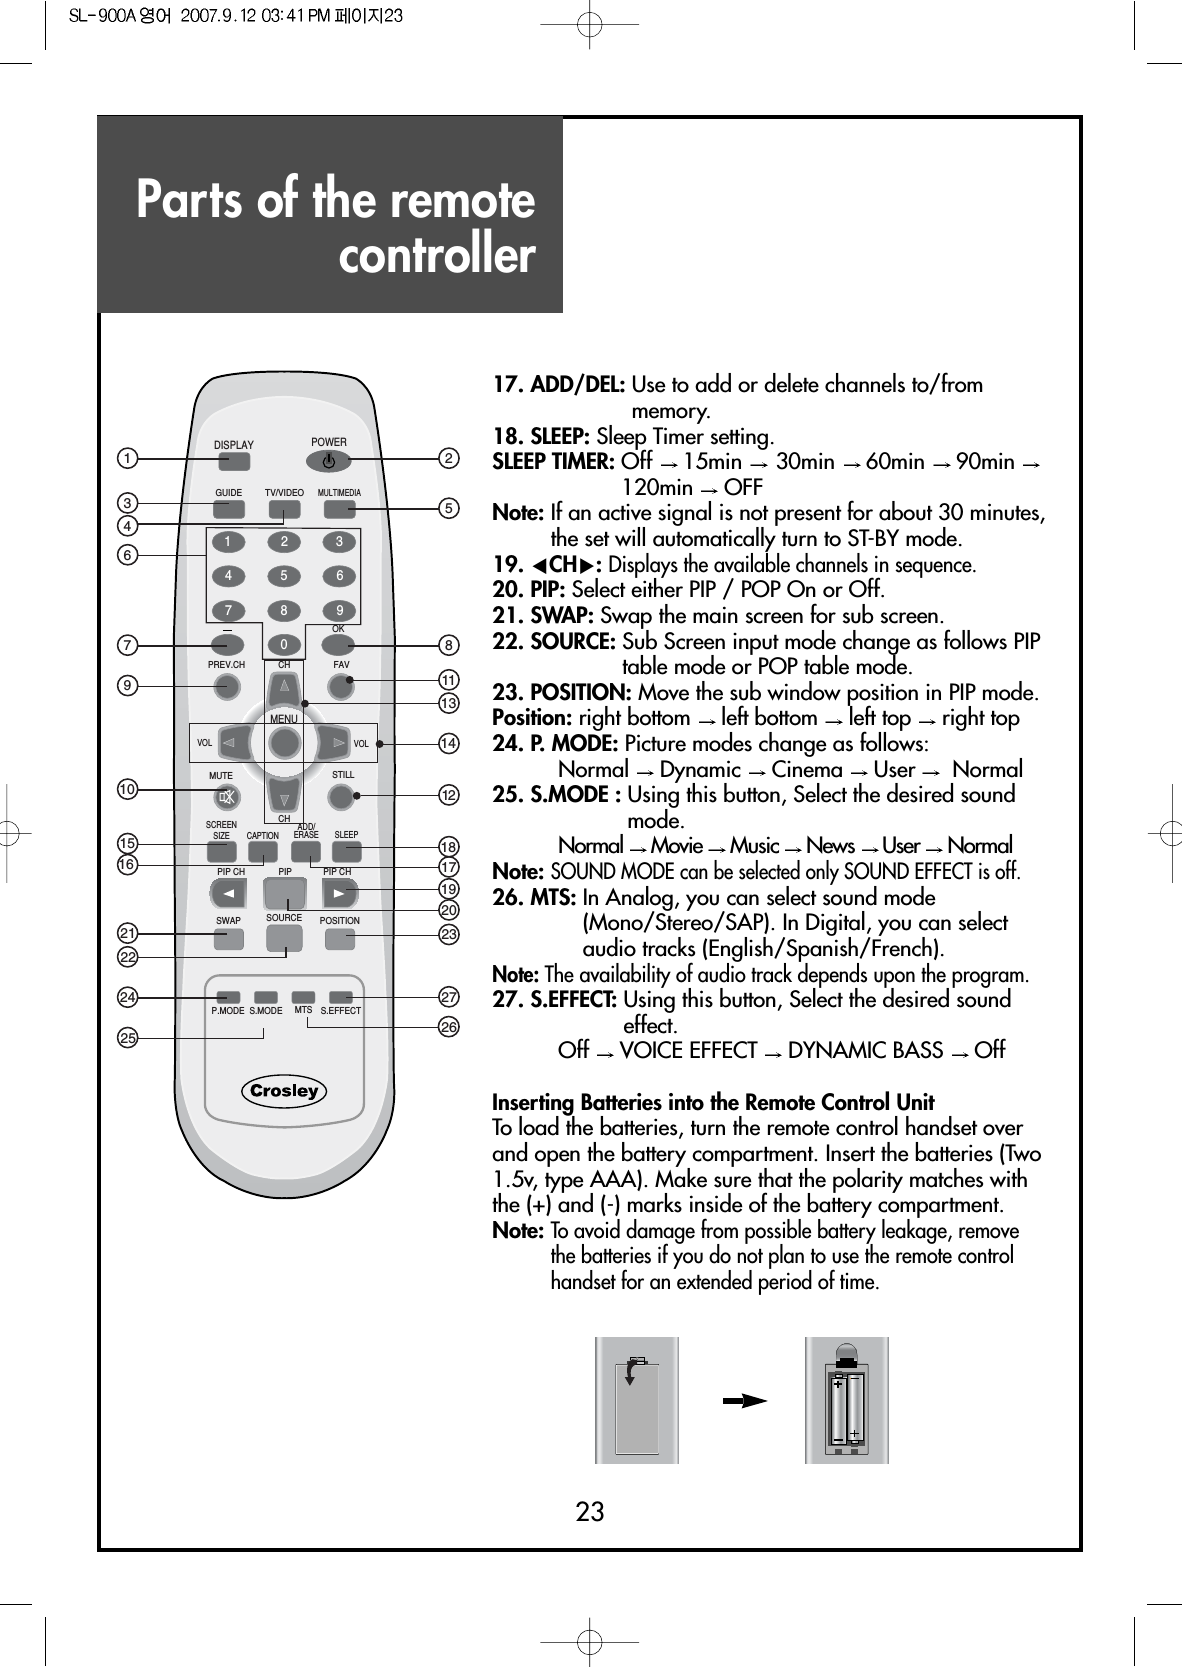 Parts of the remotecontroller2317. ADD/DEL: Use to add or delete channels to/frommemory.18. SLEEP: Sleep Timer setting.SLEEP TIMER: Off  15min  30min  60min  90min 120min  OFFNote: If an active signal is not present for about 30 minutes,the set will automatically turn to ST-BY mode.19. CCHB:Displays the available channels in sequence.20. PIP: Select either PIP / POP On or Off.21. SWAP: Swap the main screen for sub screen.22. SOURCE: Sub Screen input mode change as follows PIPtable mode or POP table mode.23. POSITION: Move the sub window position in PIP mode.Position: right bottom  left bottom  left top  right top24. P. MODE: Picture modes change as follows:Normal  Dynamic  Cinema  User  Normal25. S.MODE : Using this button, Select the desired soundmode.Normal  Movie  Music  News  User  NormalNote:SOUND MODE can be selected only SOUND EFFECT is off.26. MTS: In Analog, you can select sound mode(Mono/Stereo/SAP). In Digital, you can selectaudio tracks (English/Spanish/French).Note: The availability of audio track depends upon the program.27. S.EFFECT: Using this button, Select the desired soundeffect.Off  VOICE EFFECT  DYNAMIC BASS  OffInserting Batteries into the Remote Control UnitTo load the batteries, turn the remote control handset overand open the battery compartment. Insert the batteries (Two1.5v, type AAA). Make sure that the polarity matches withthe (+) and (-) marks inside of the battery compartment.Note:To avoid damage from possible battery leakage, removethe batteries if you do not plan to use the remote controlhandset for an extended period of time.DISPLAYMENUGUIDE TV/VIDEOFAVPREV.CHMUTESCREENSIZE CAPTIONPIP CH PIP CHPIPSWAPP.MODE S.MODE S.EFFECTMTSSOURCE POSITIONSLEEPVOL VOLCHCHMULTIMEDIAOKPOWER1234567809STILLADD/ERASE136791021152416252242581314121118231927172620